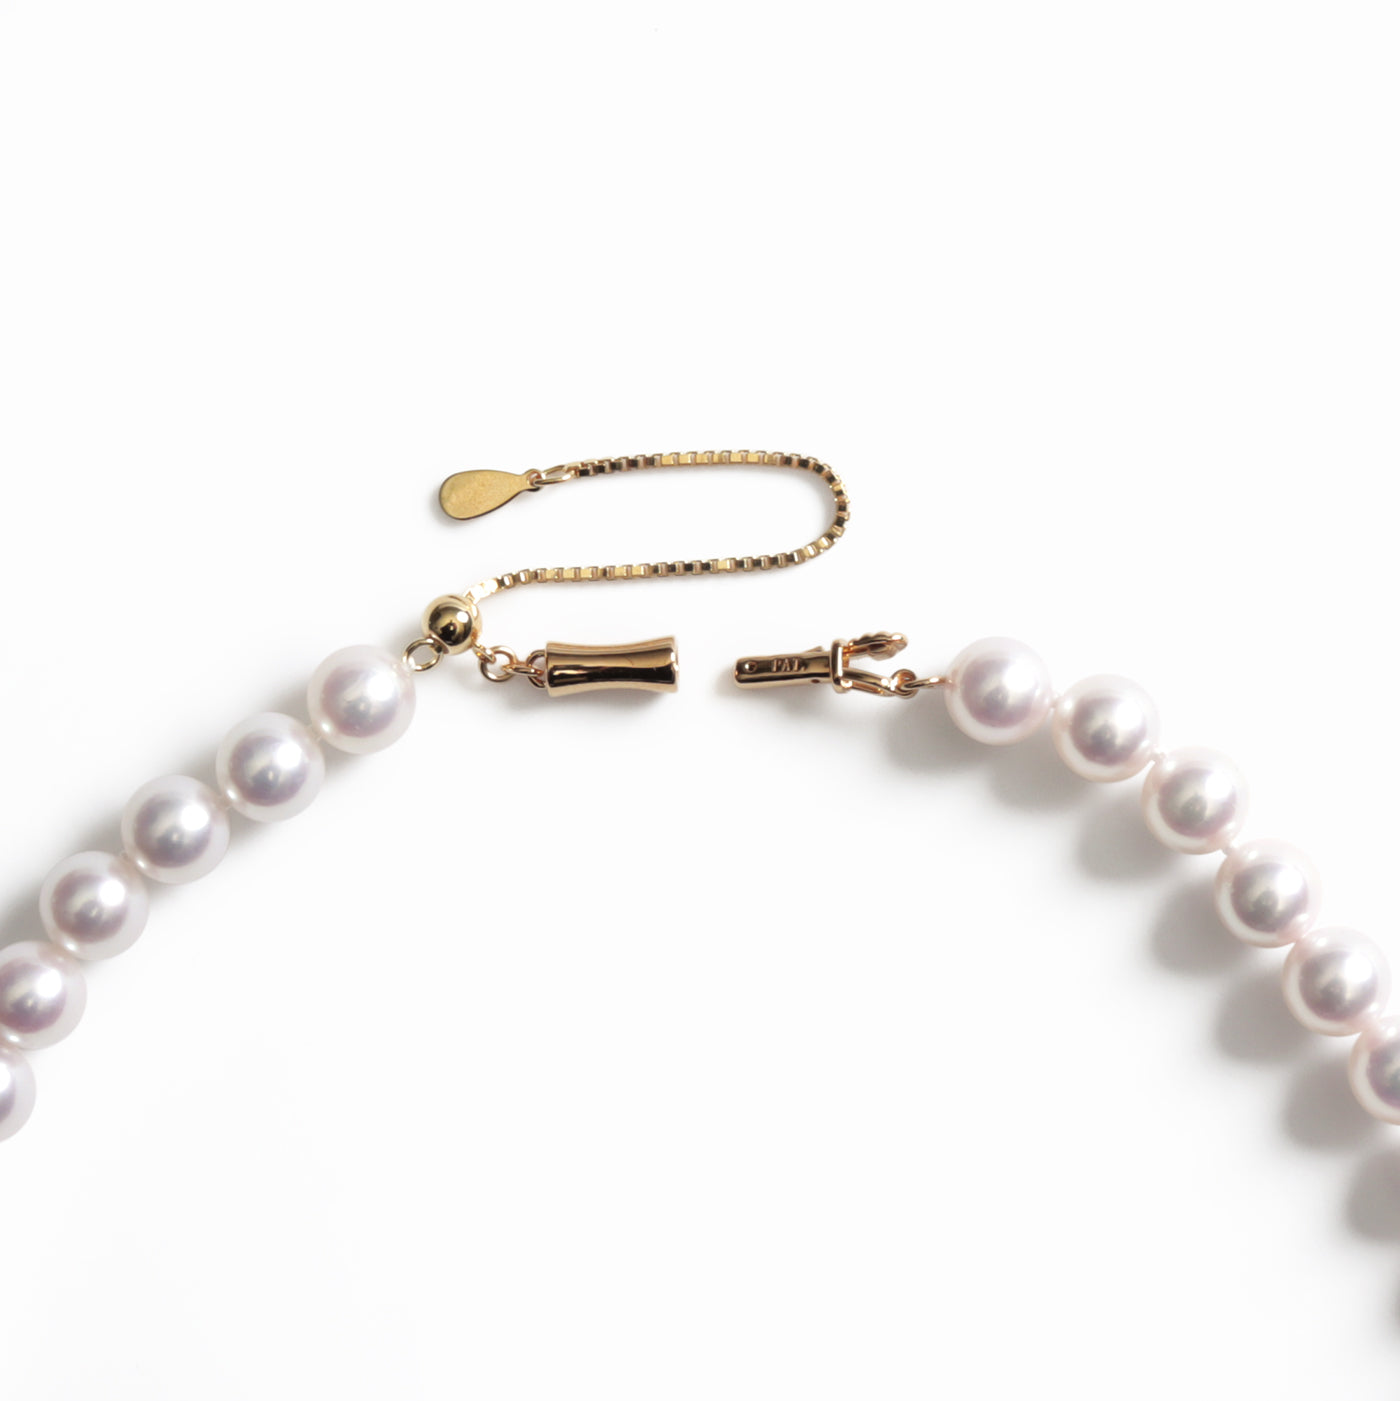 Akoya Pearl Necklace - 7.0-7.5mm "花珠"アコヤパール